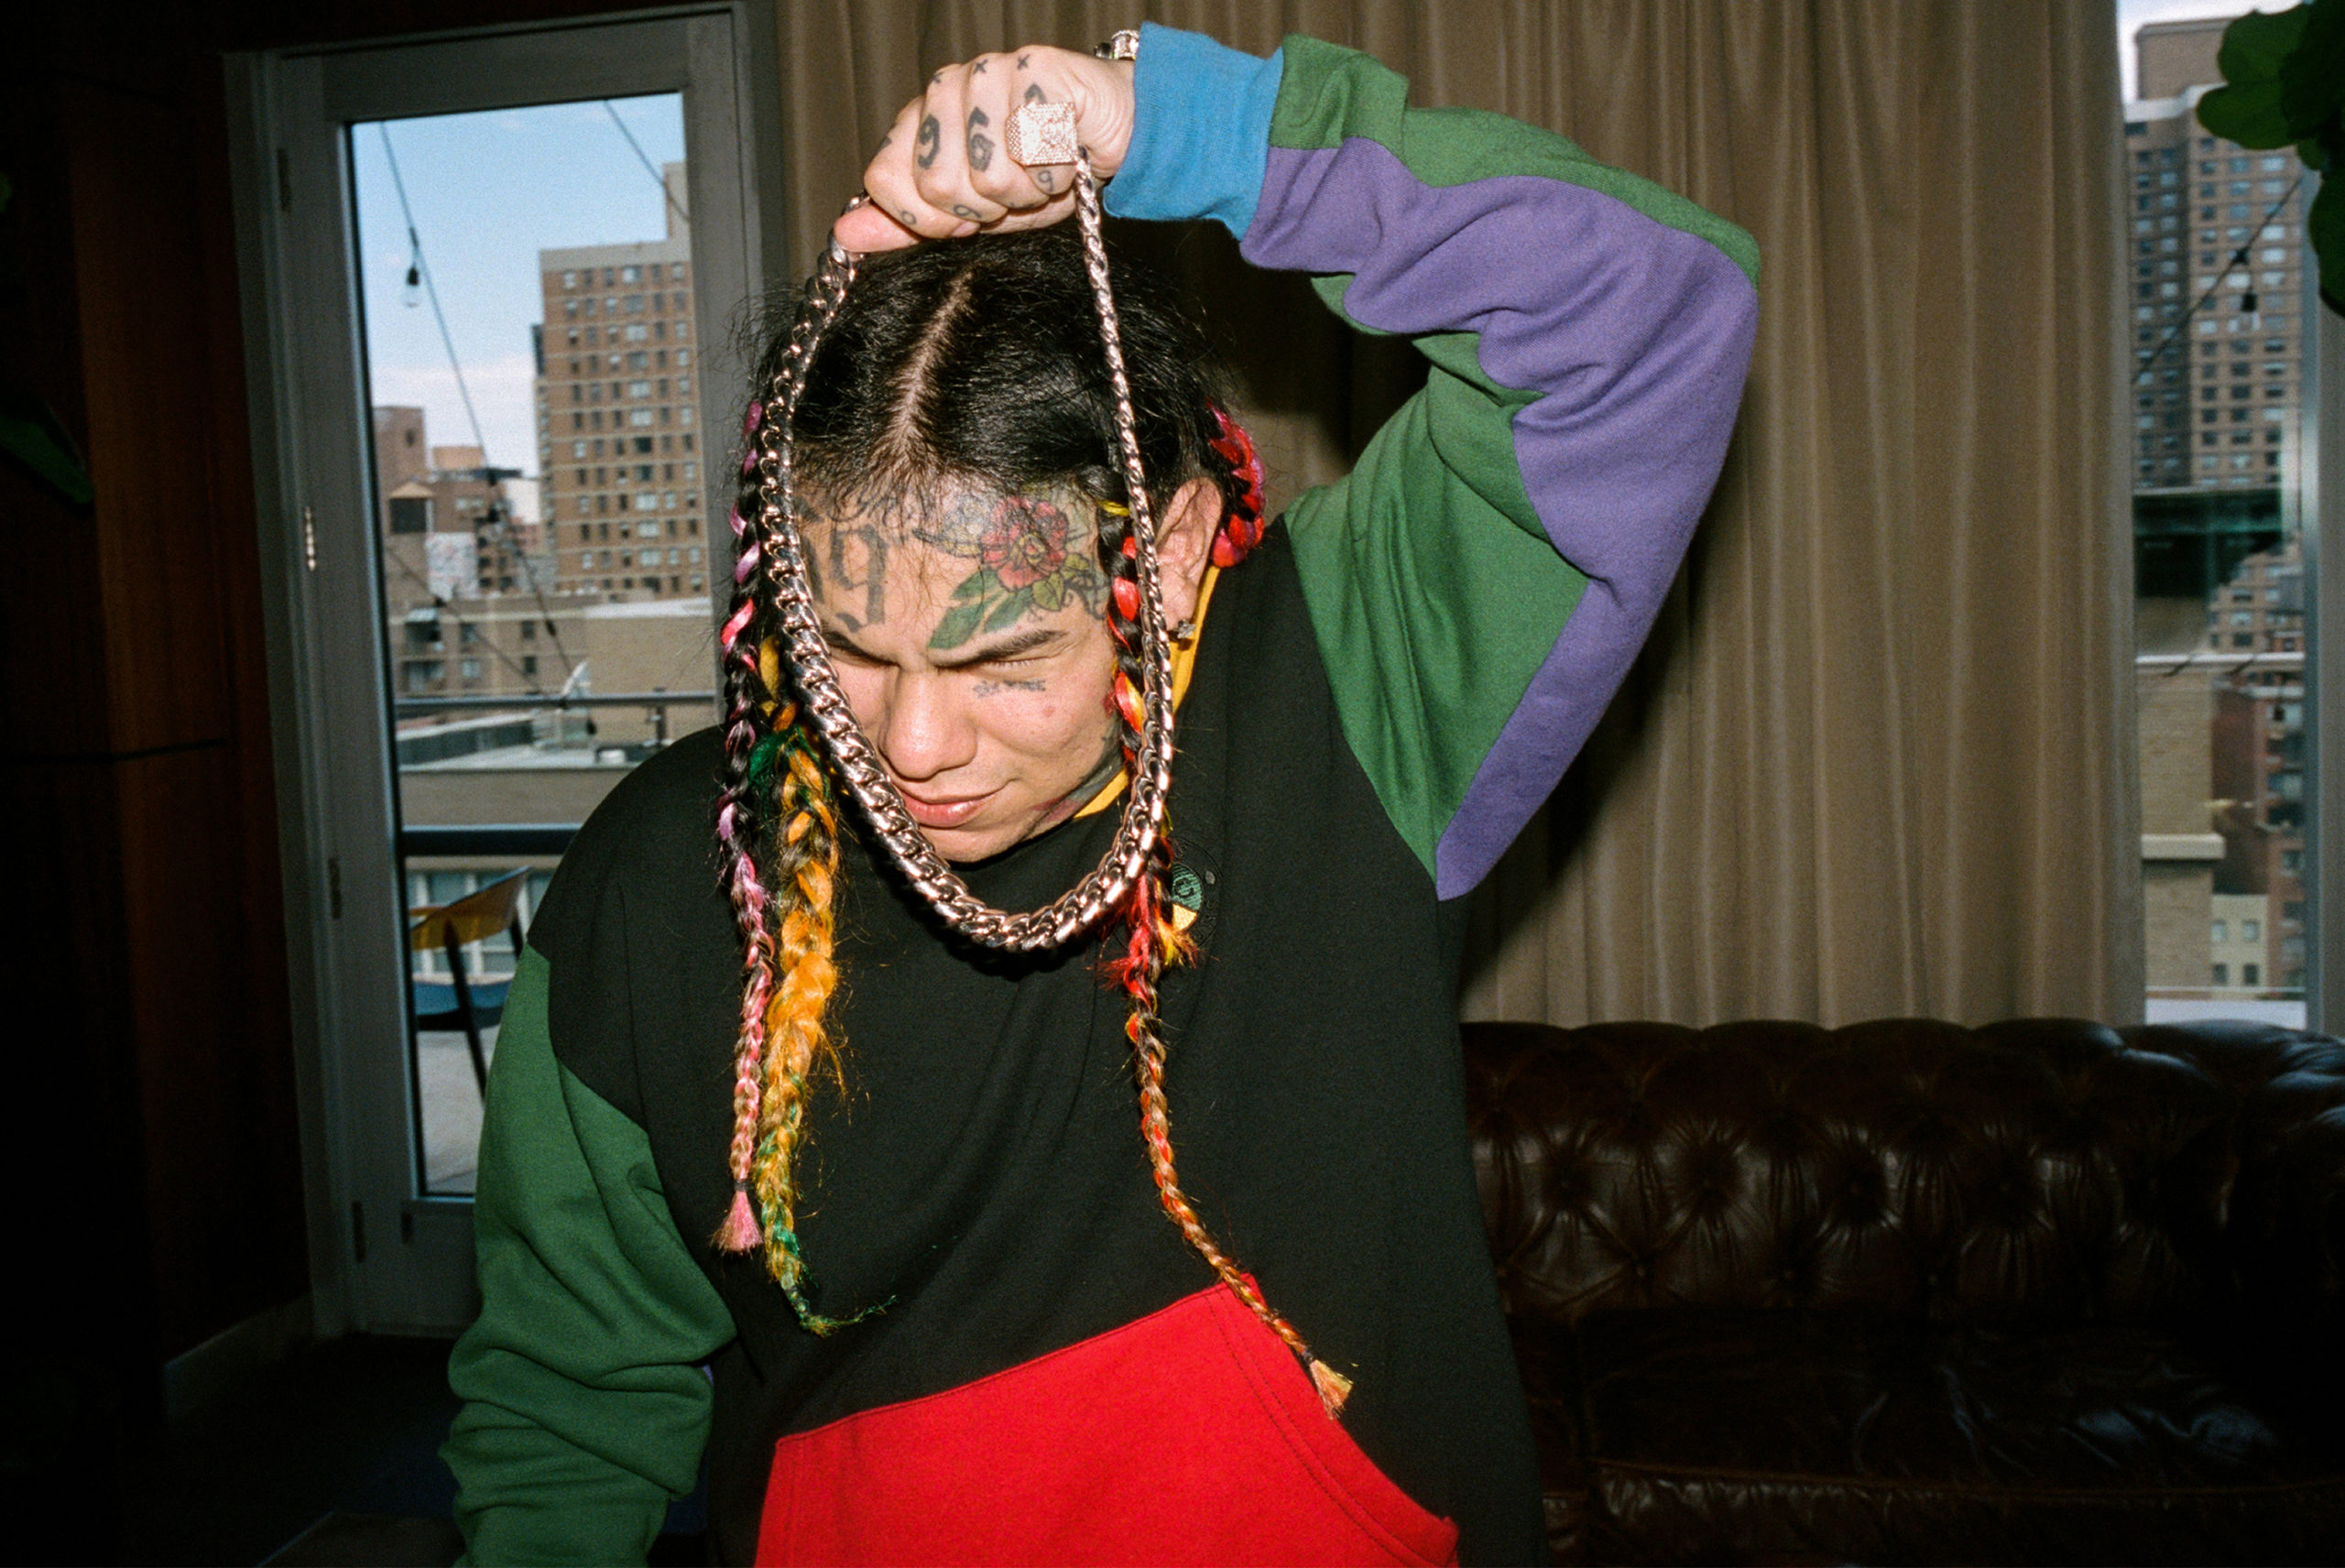 The rapper 6ix9ine, born Daniel Hernandez and also known as Tekashi69, in New York, Aug. 23, 2020. (Daniel Arnold/The New York Times)